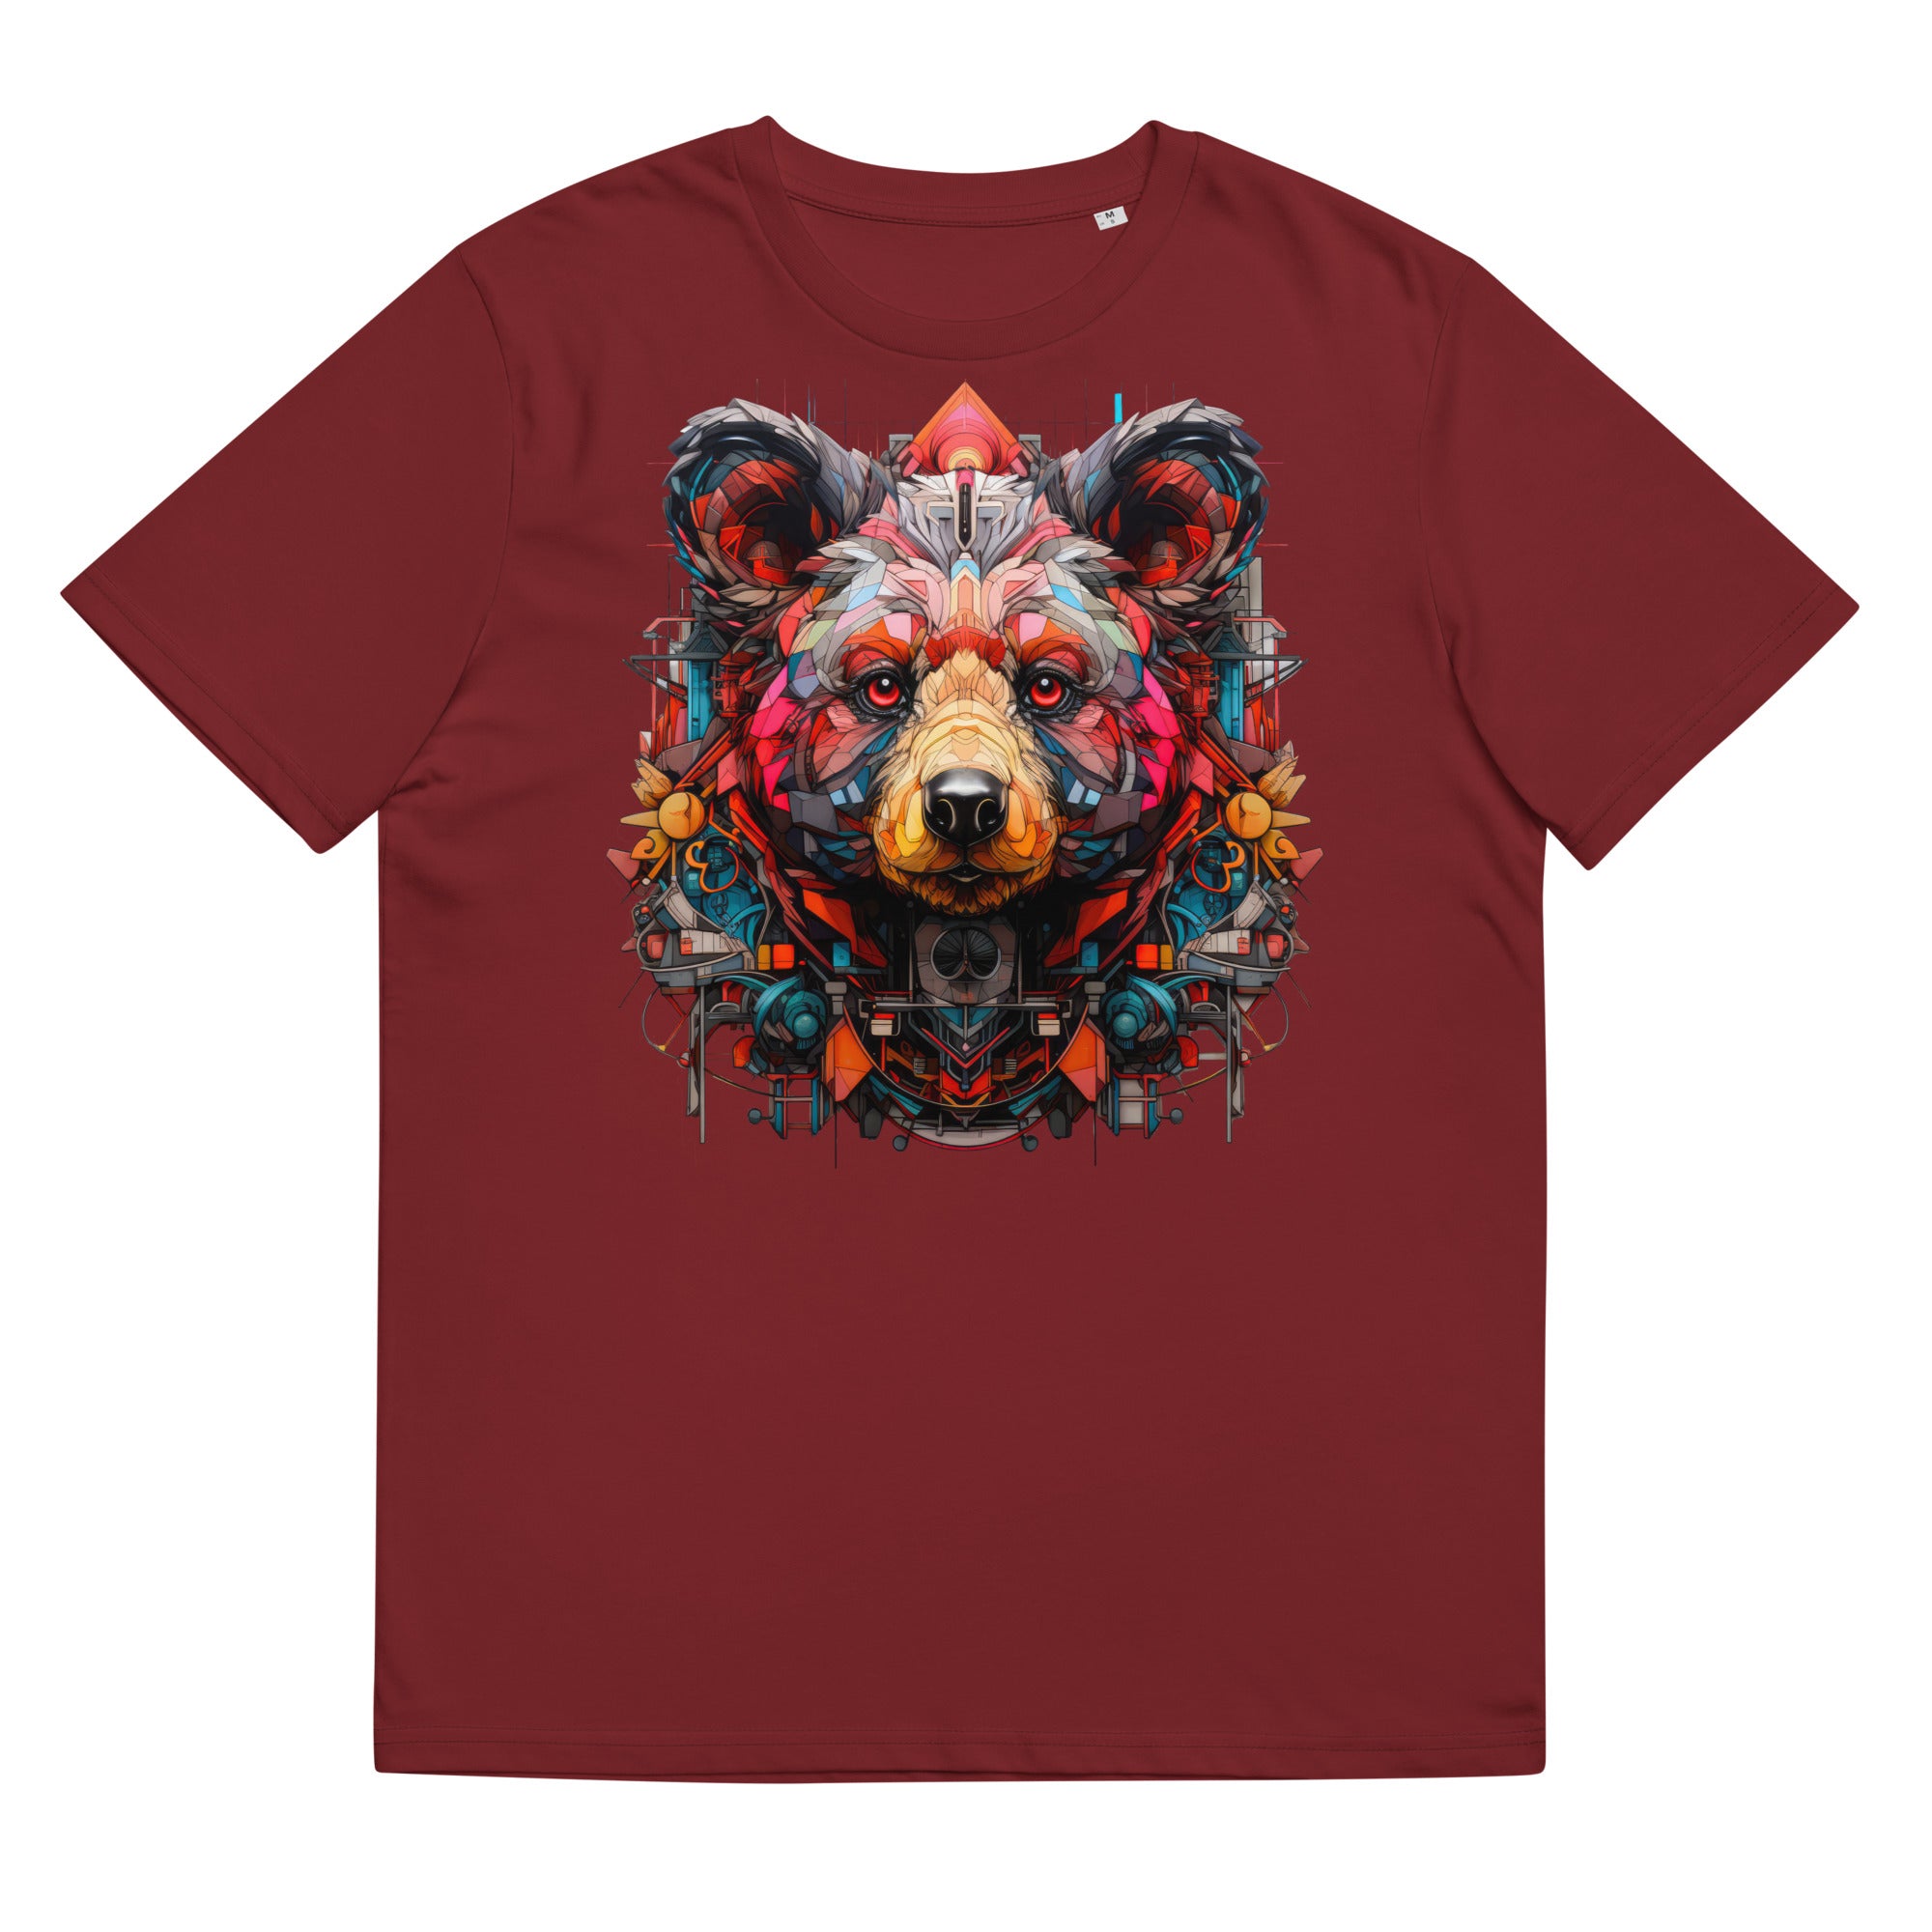 Bear in bright colors